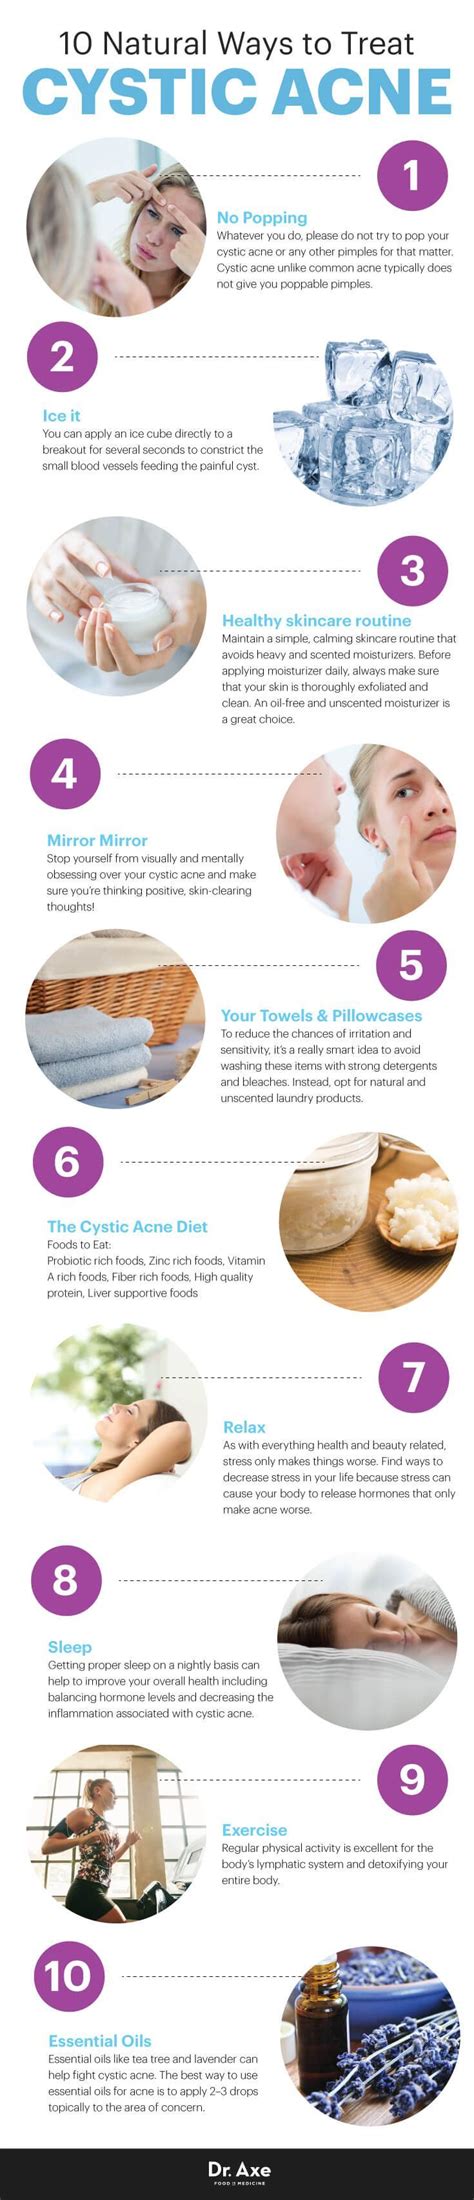 10 Natural Cystic Acne Treatments That Really Work Cystic Acne